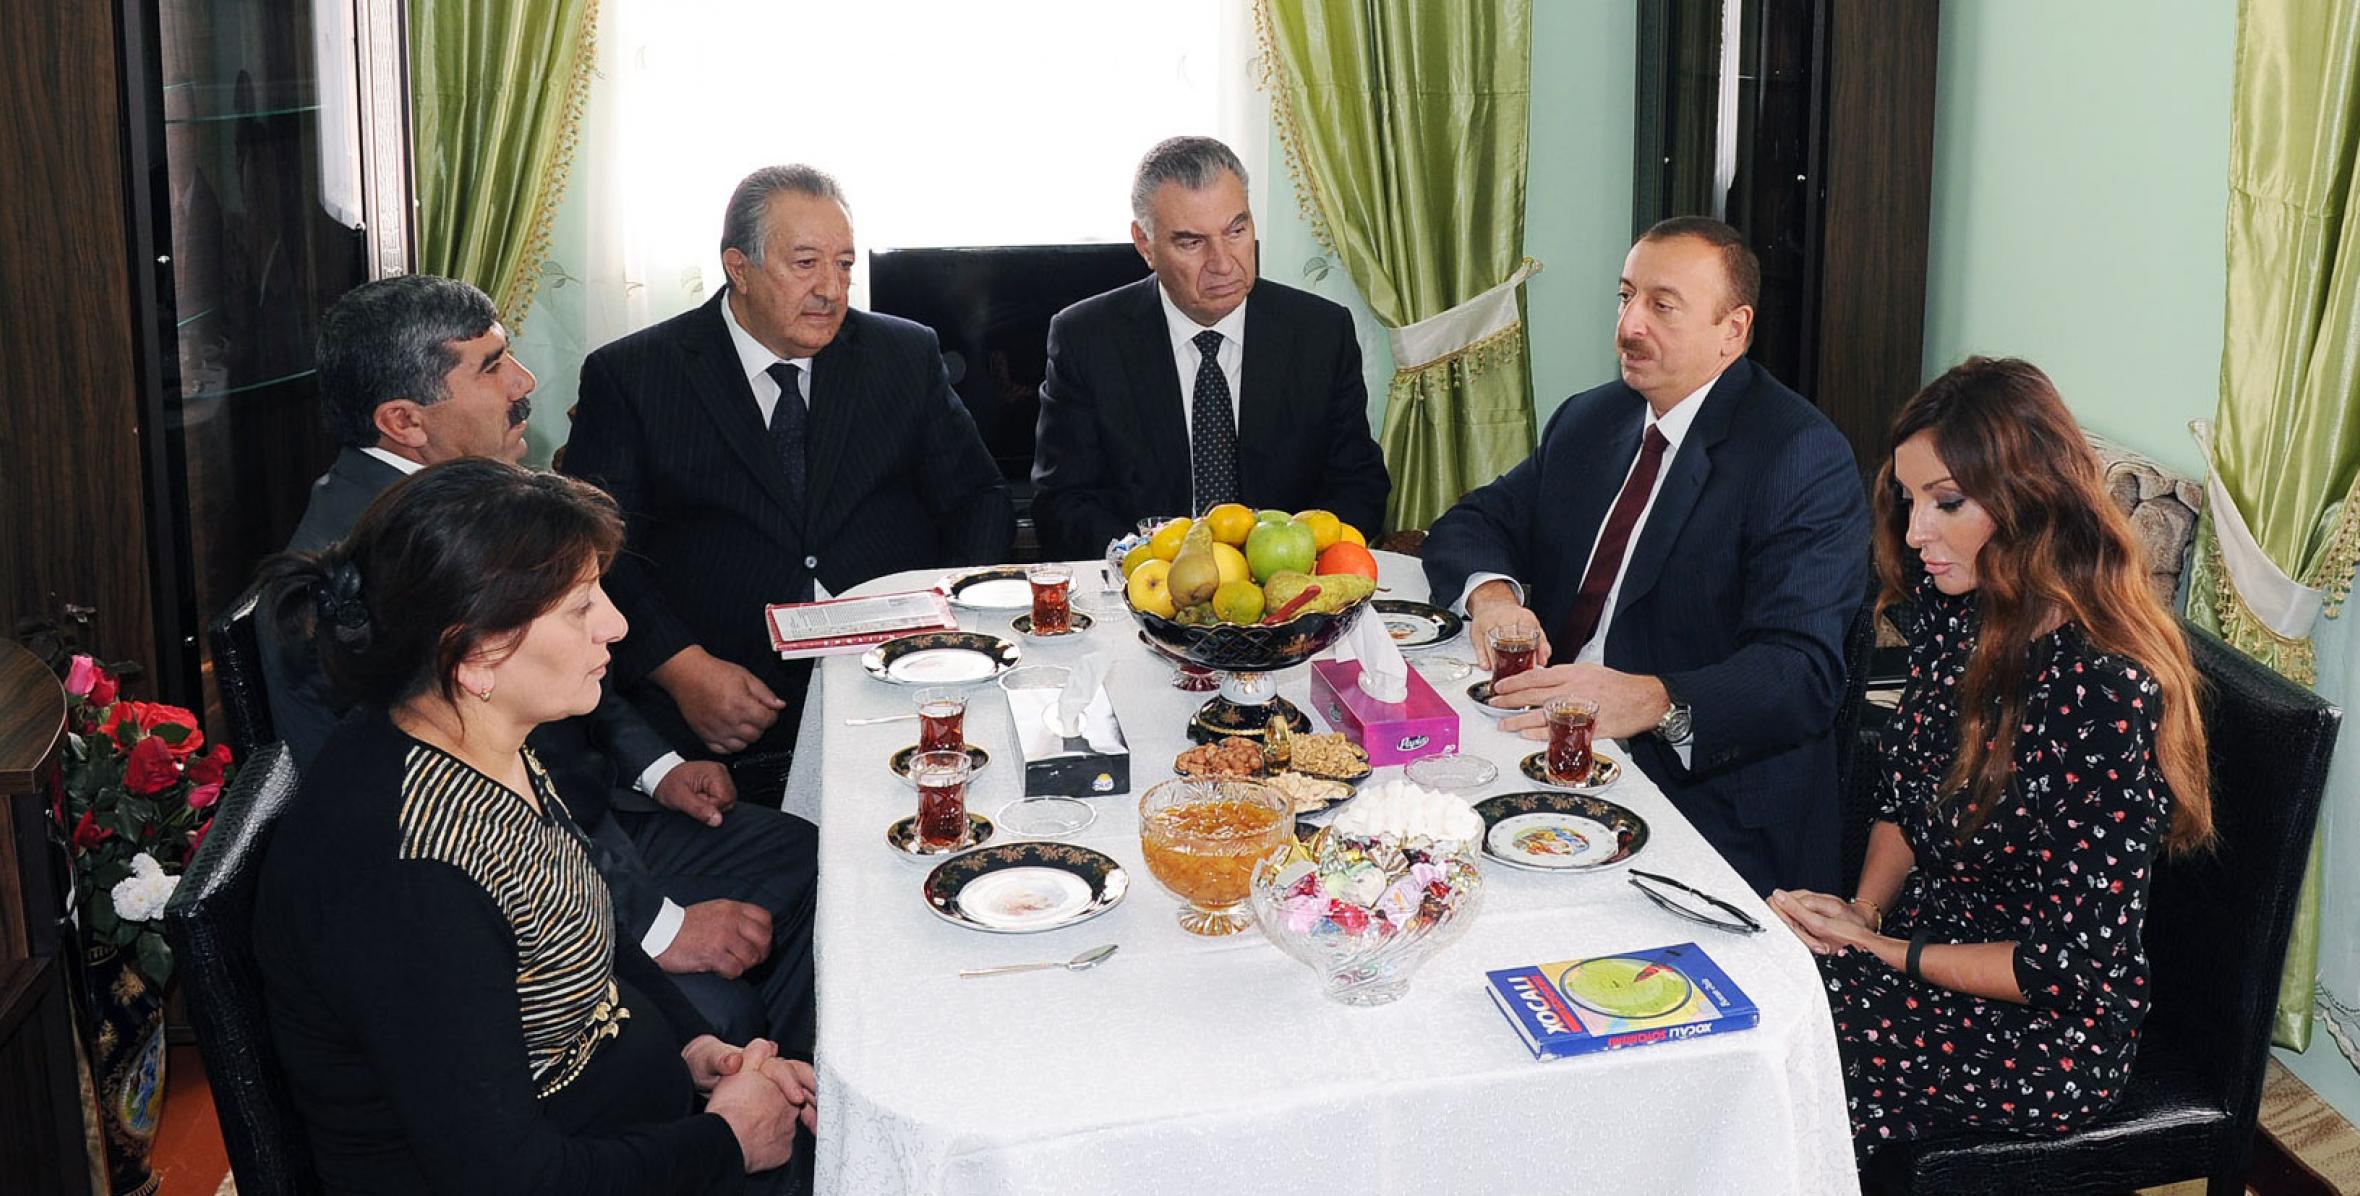 Ilham Aliyev participated at the opening of a new settlement for IDP families in Agdam region